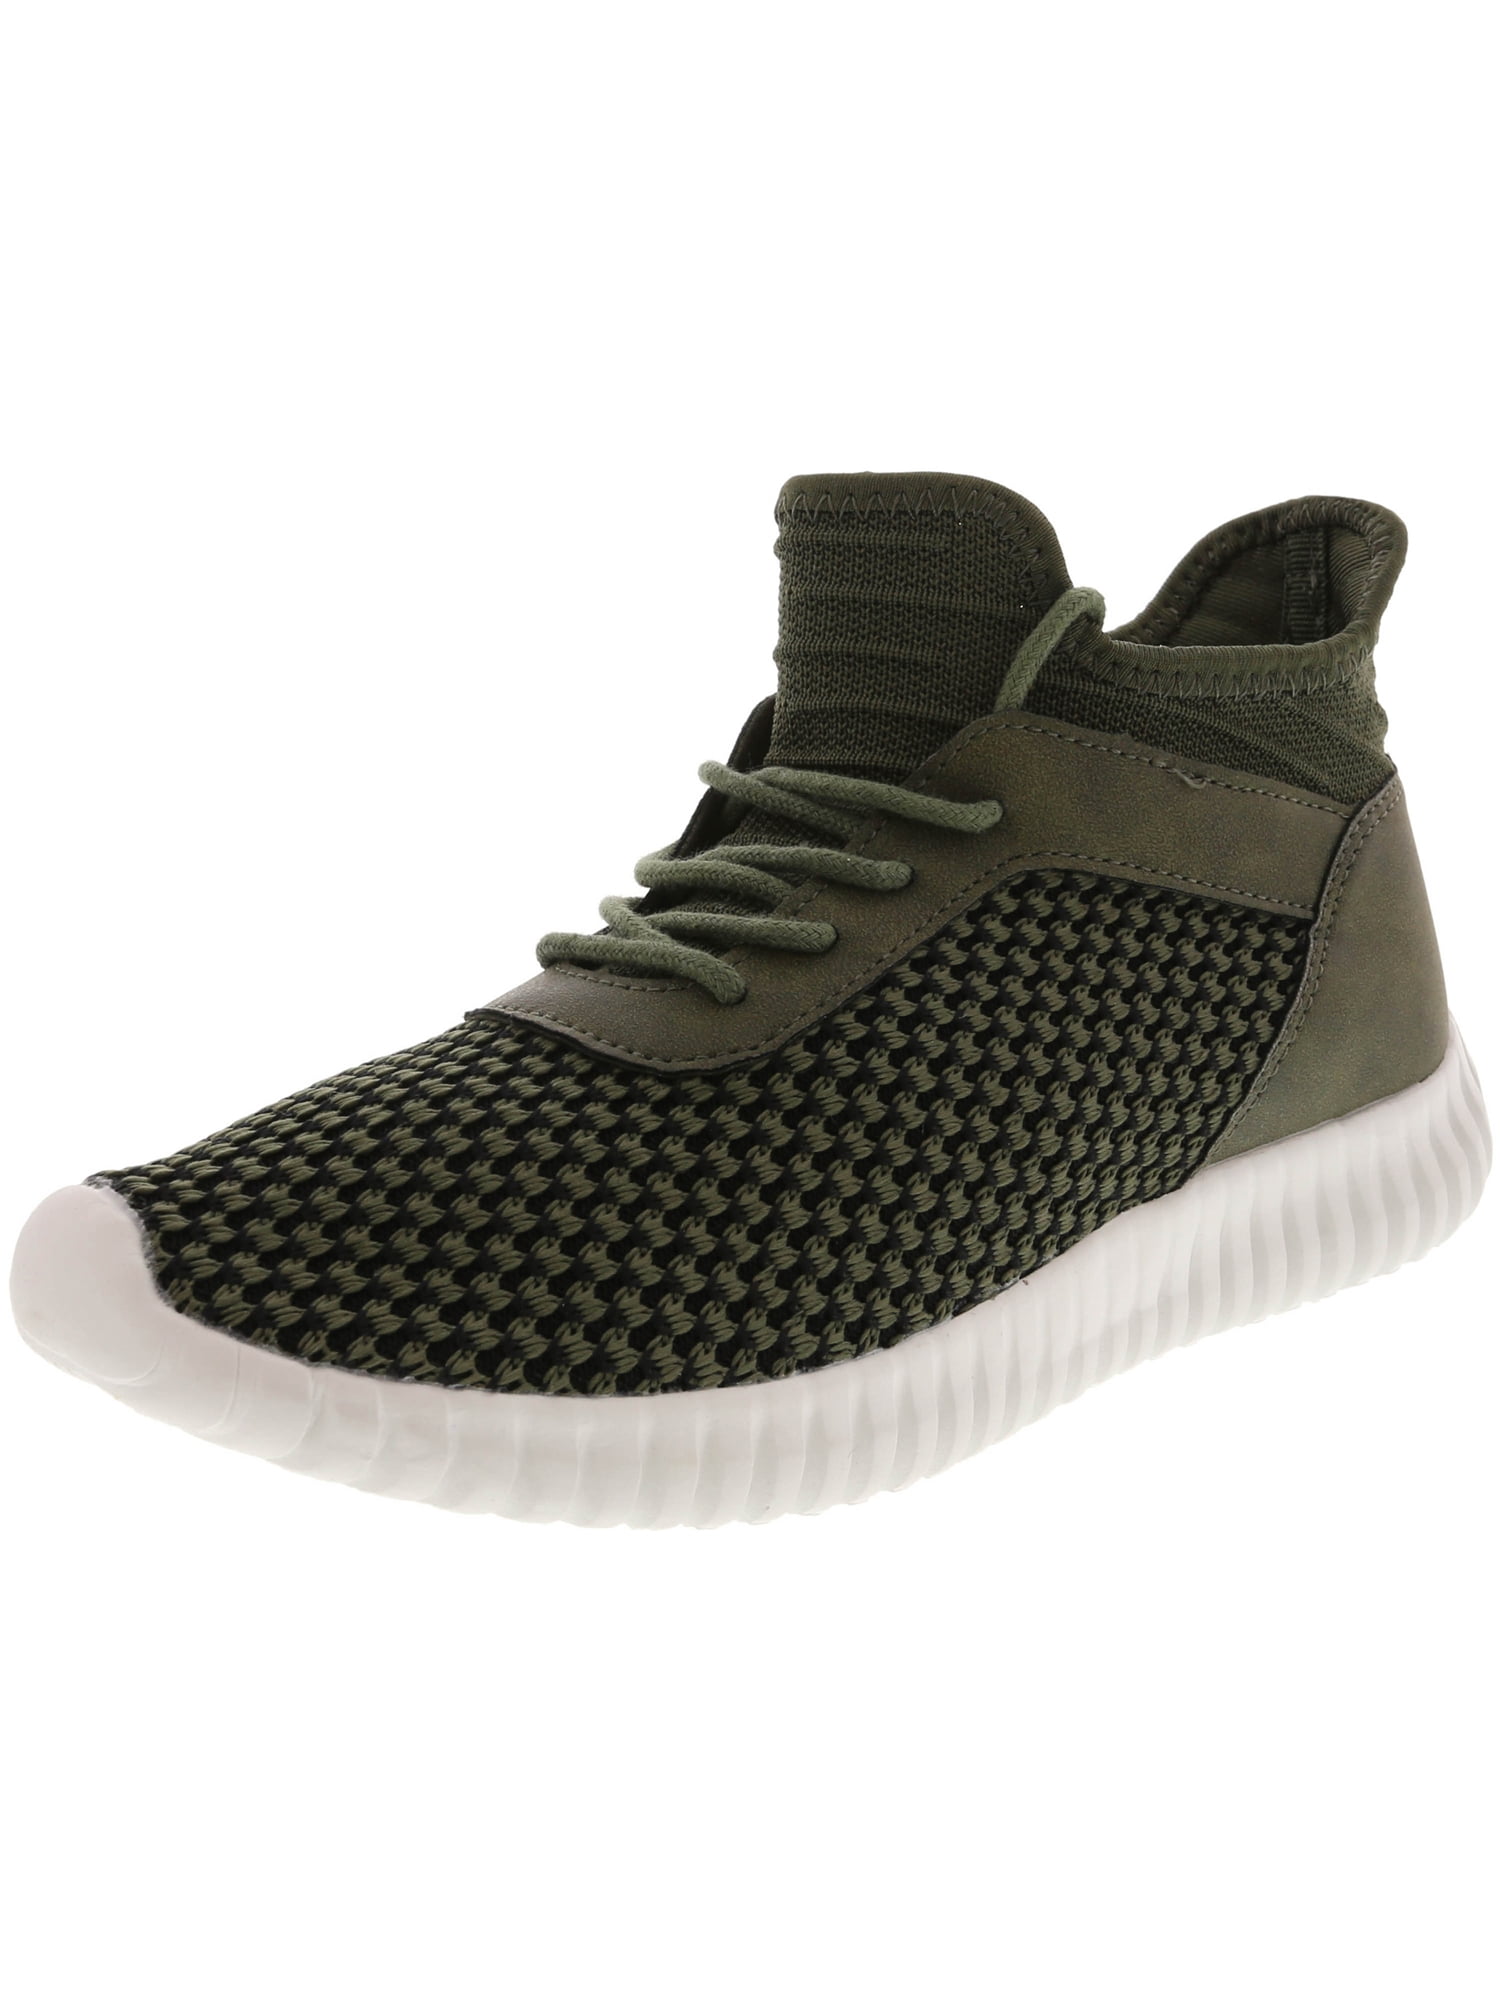 Dirty Laundry Women's Harlen Knit Olive High-Top Fabric Fashion Sneaker -  6M 